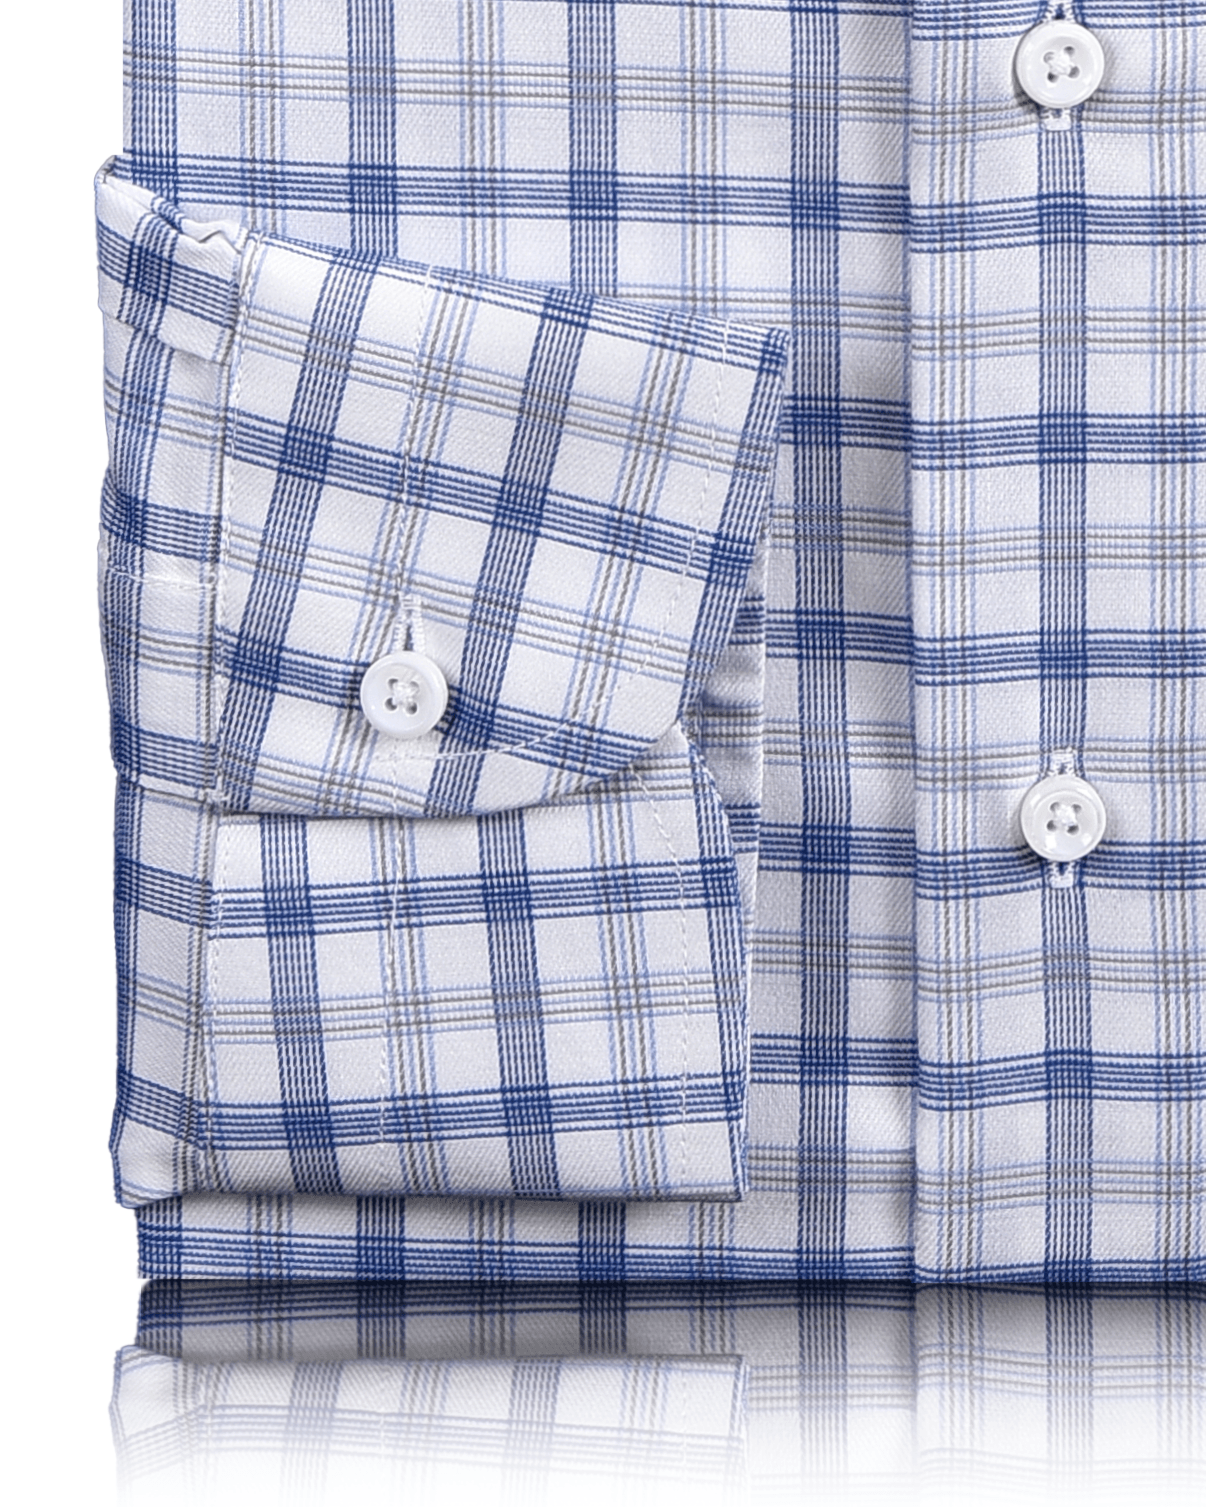 Close up view of custom check shirts for men by Luxire in monti blue grey tattersall